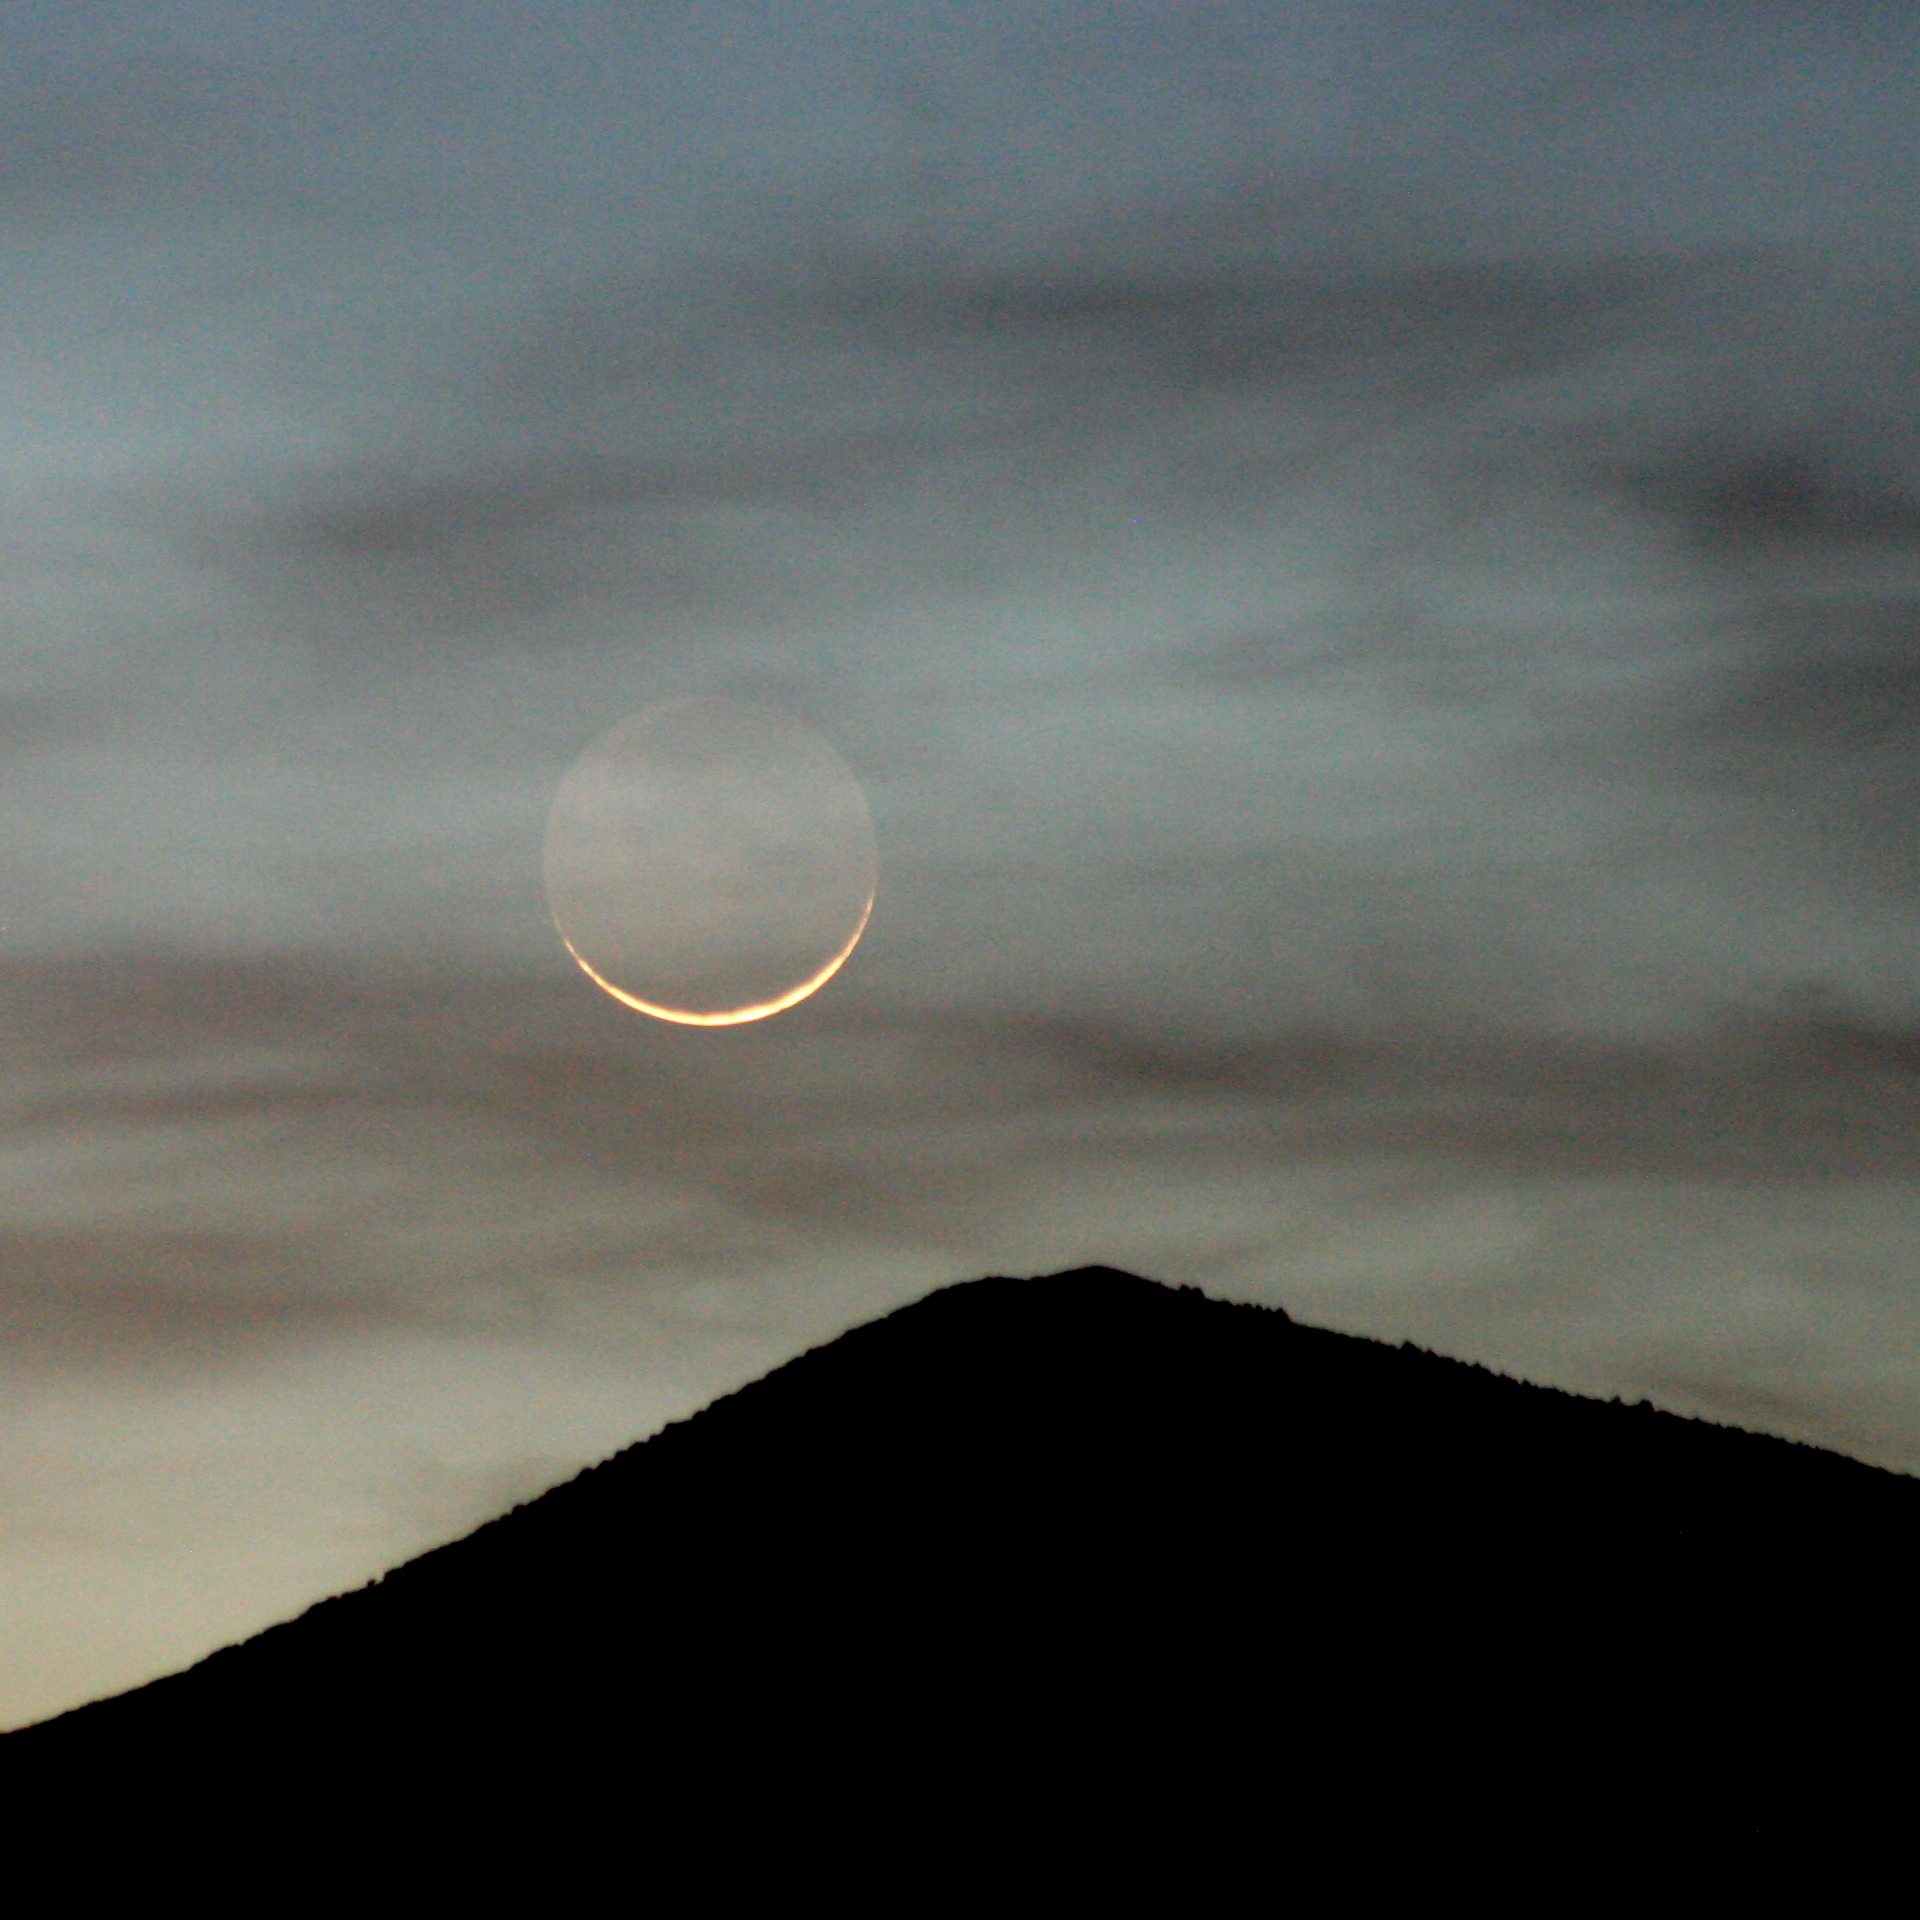 Captivating Crescent Moon in a Night Sky